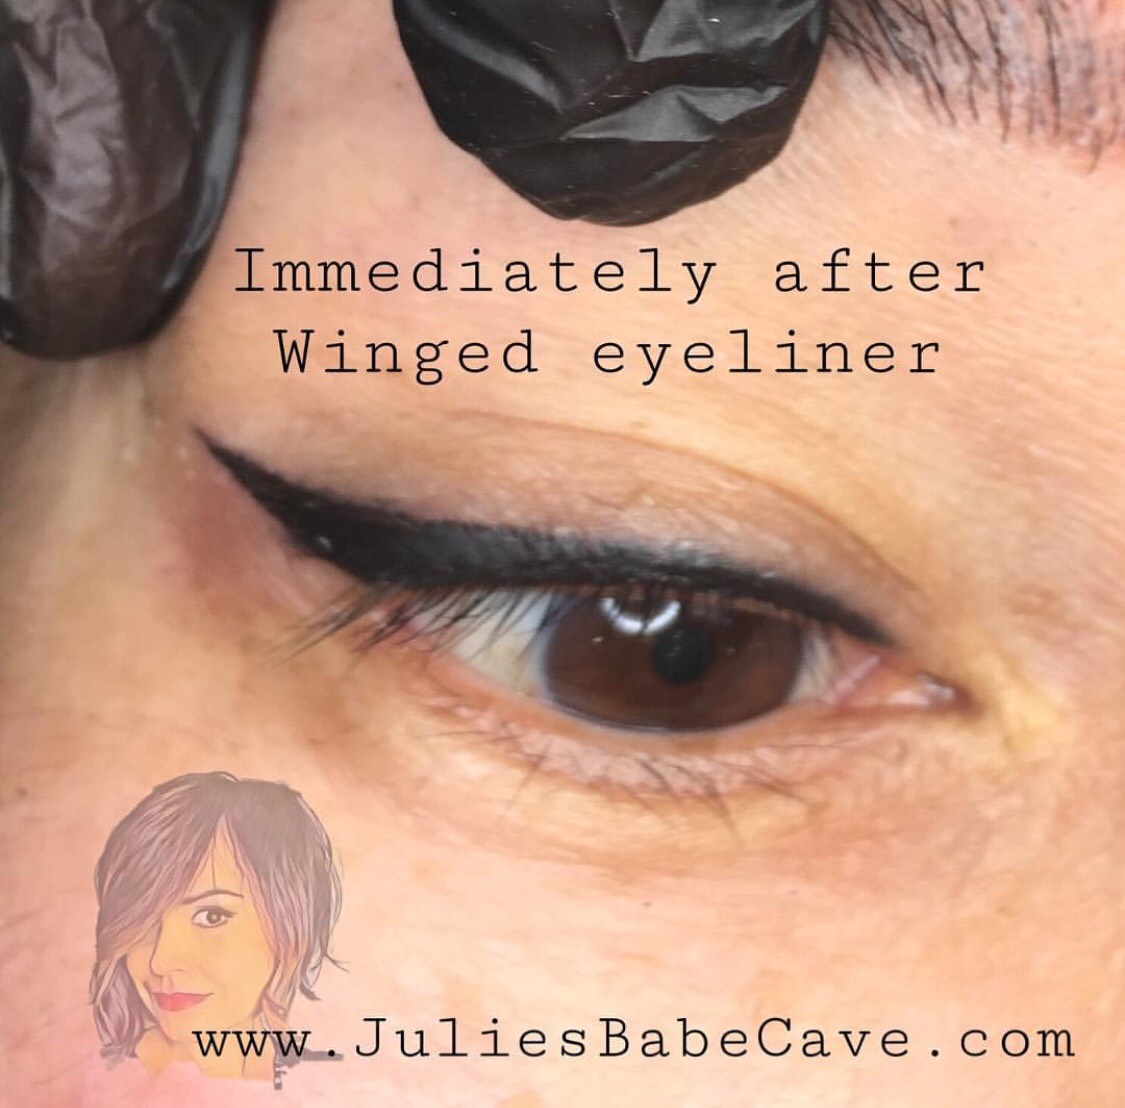 Before and After Pictures of Healed Eyebrow Microblading and Permanent Makeup  tattooing — Permanent Makeup